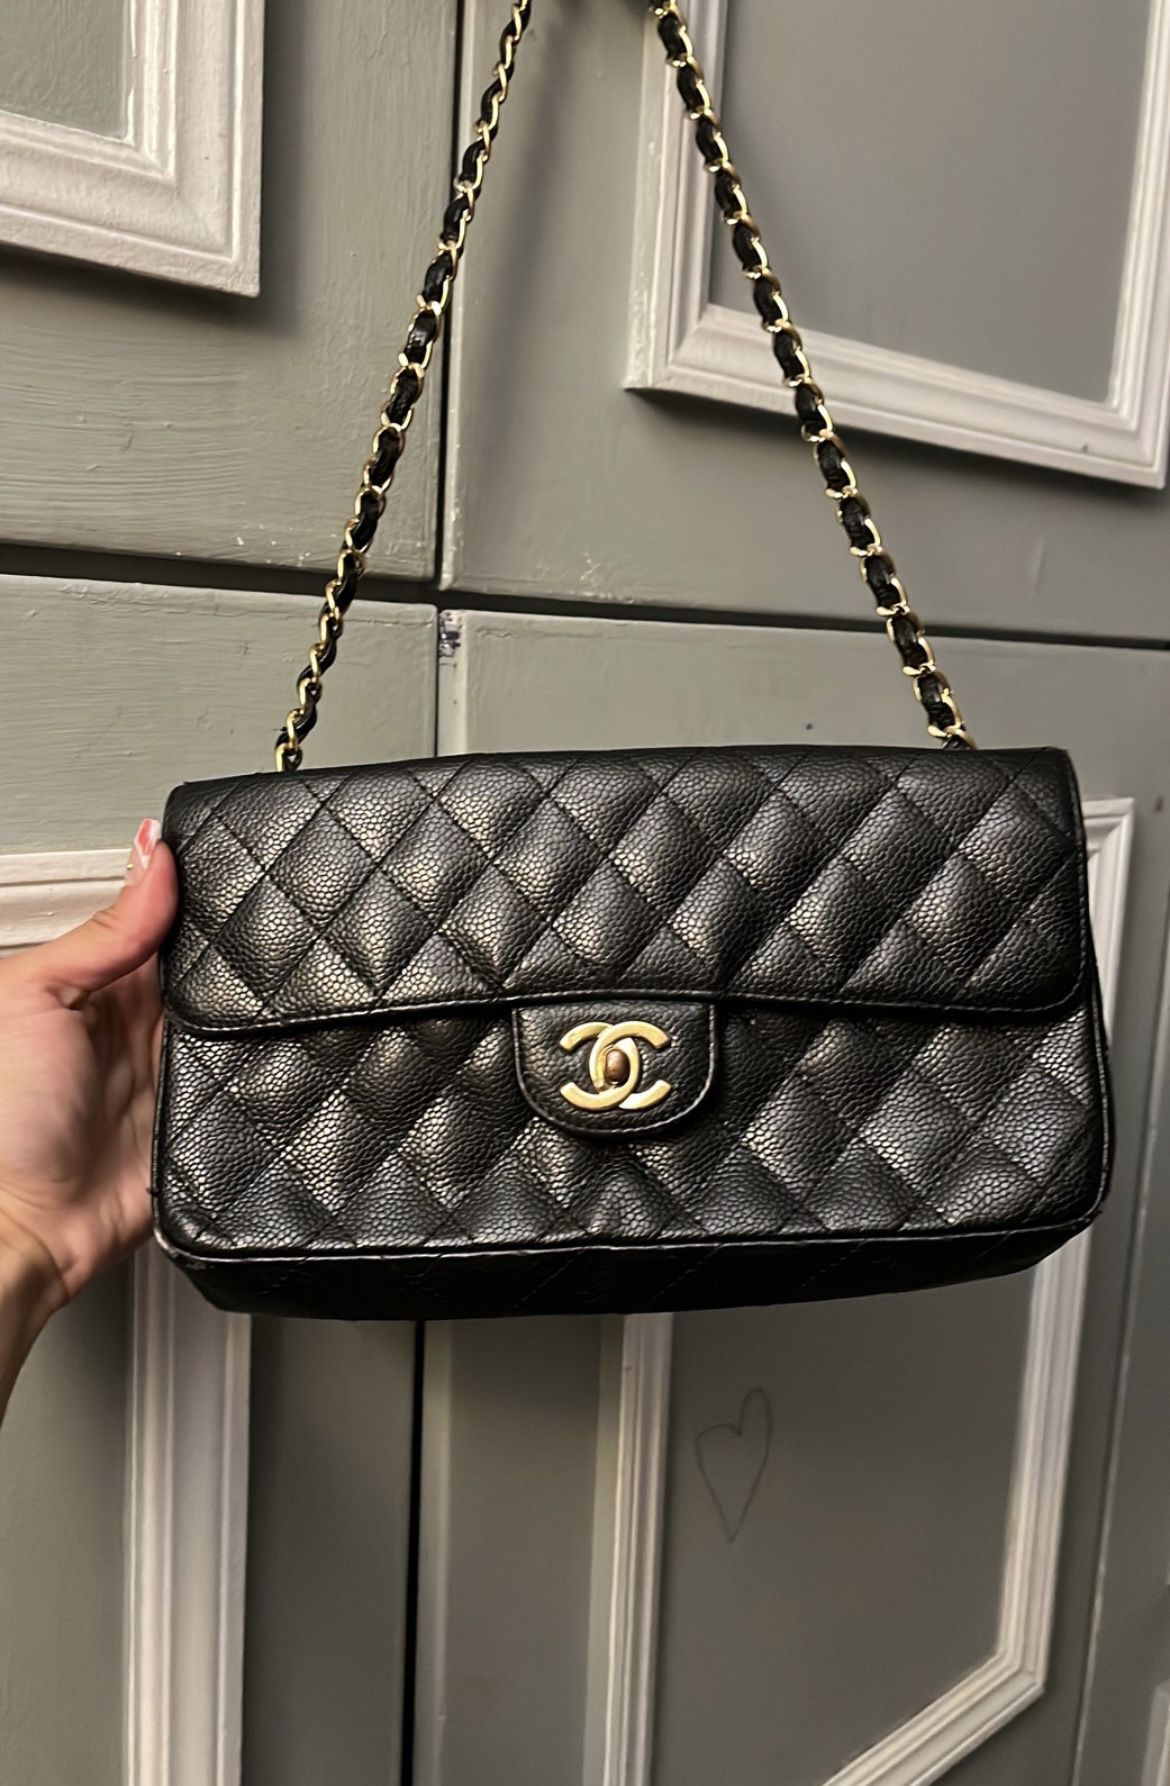 Original Chanel Bag Or Clothes Pin for Sale in El Paso, TX - OfferUp